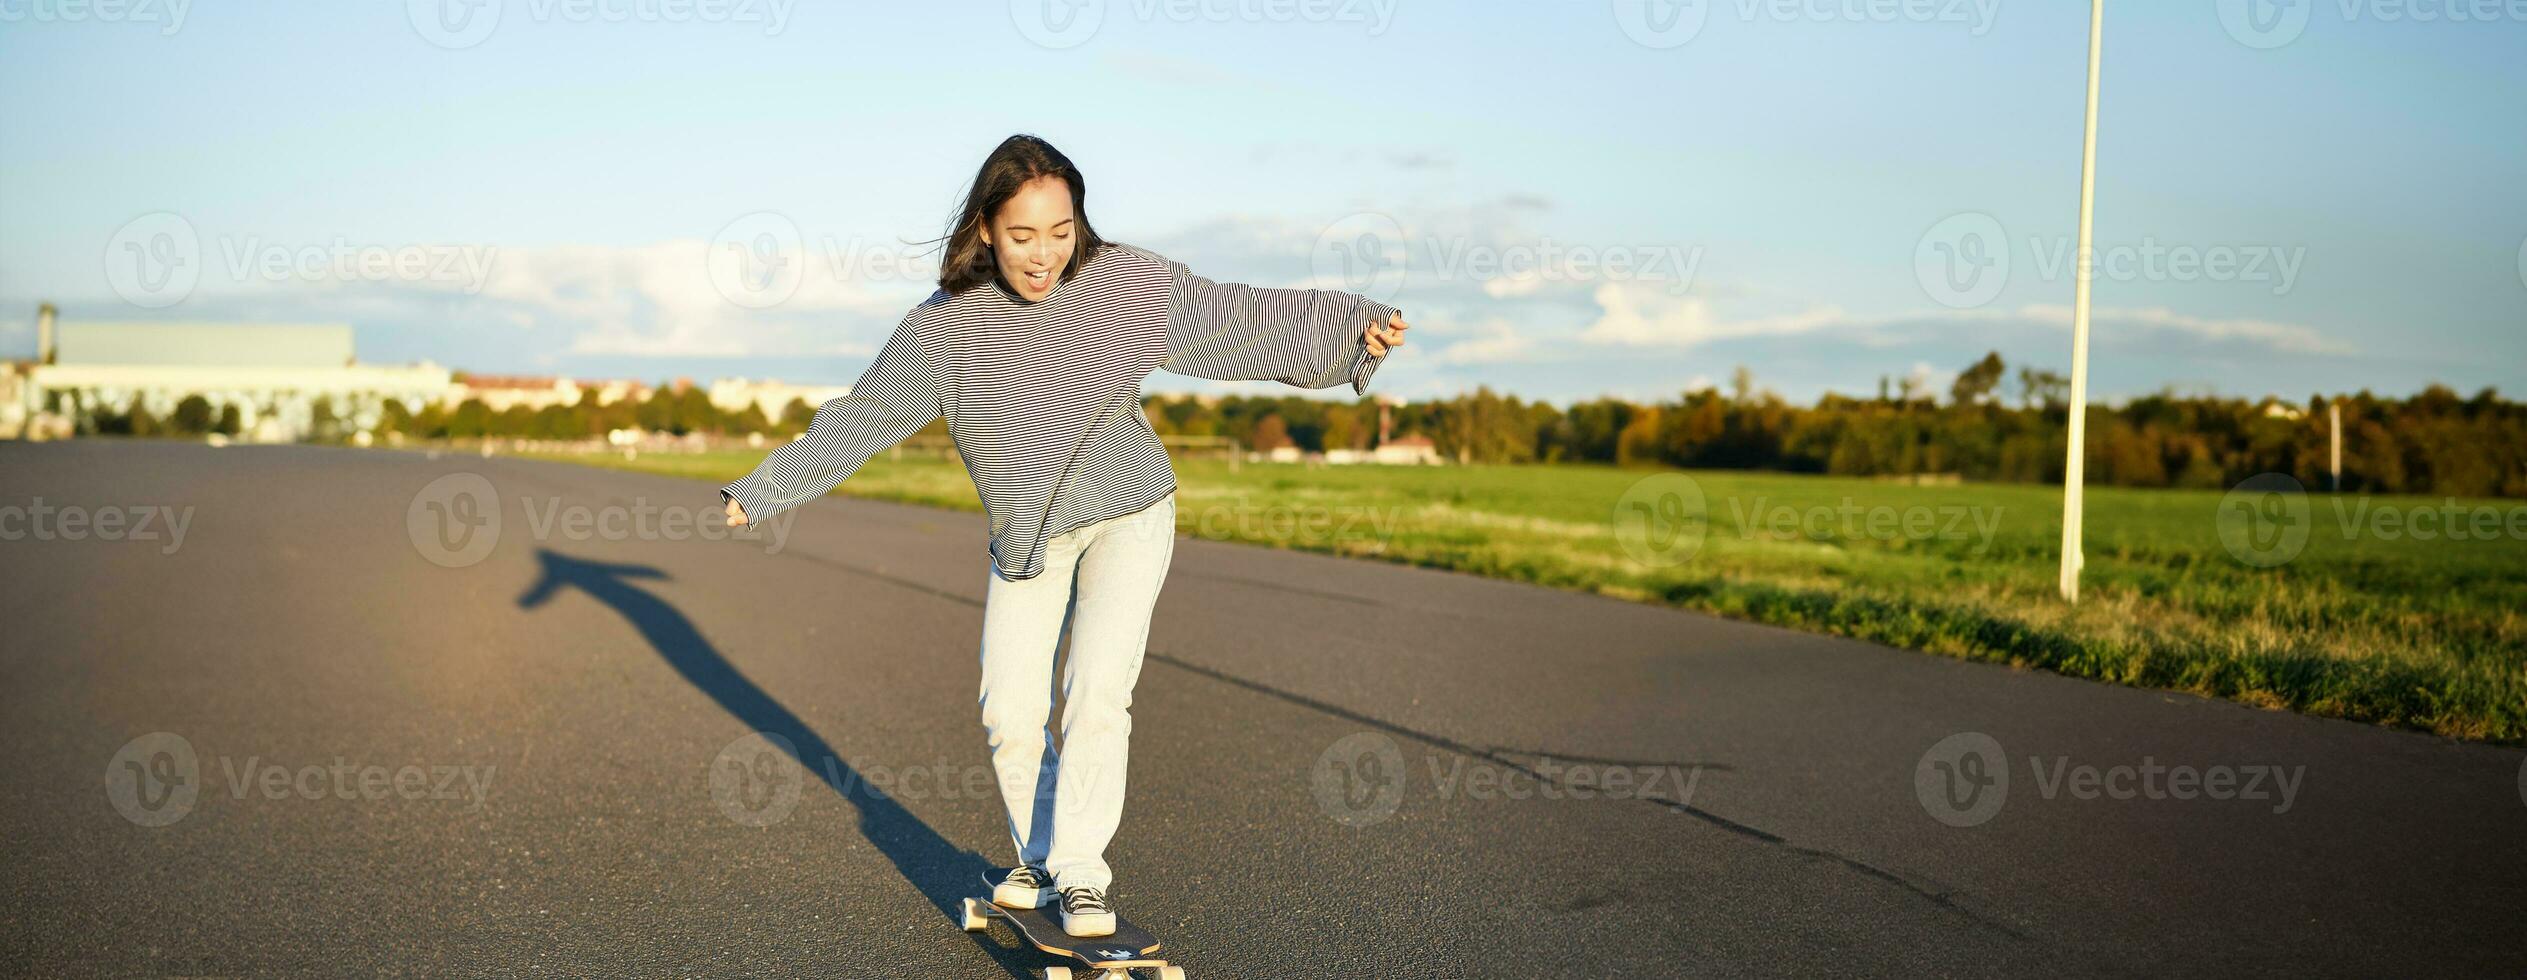 Vertical portrait of happy asian girl enjoying skateboard fun day out. Smiling korean skater on longboard, riding along empty street on sunny day photo